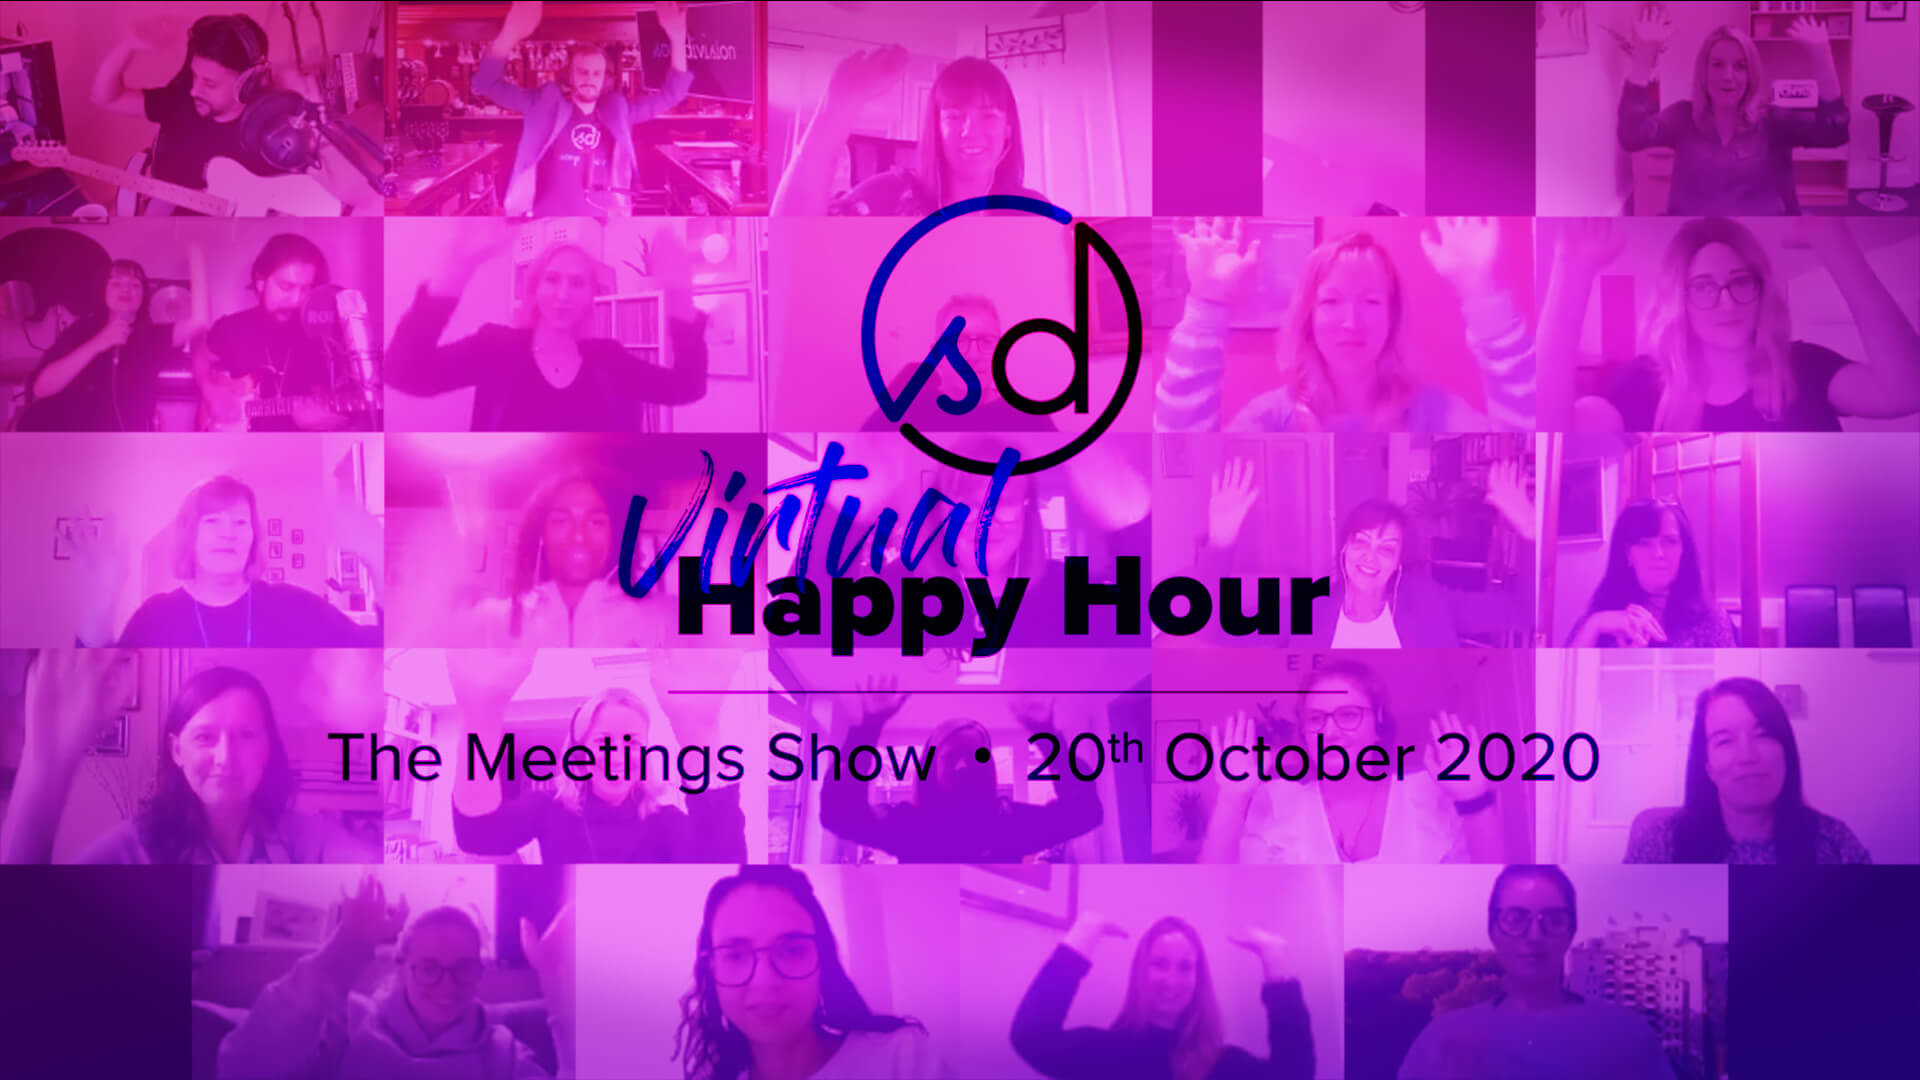 The Meetings Show: Virtual Happy Hour with SongDivision